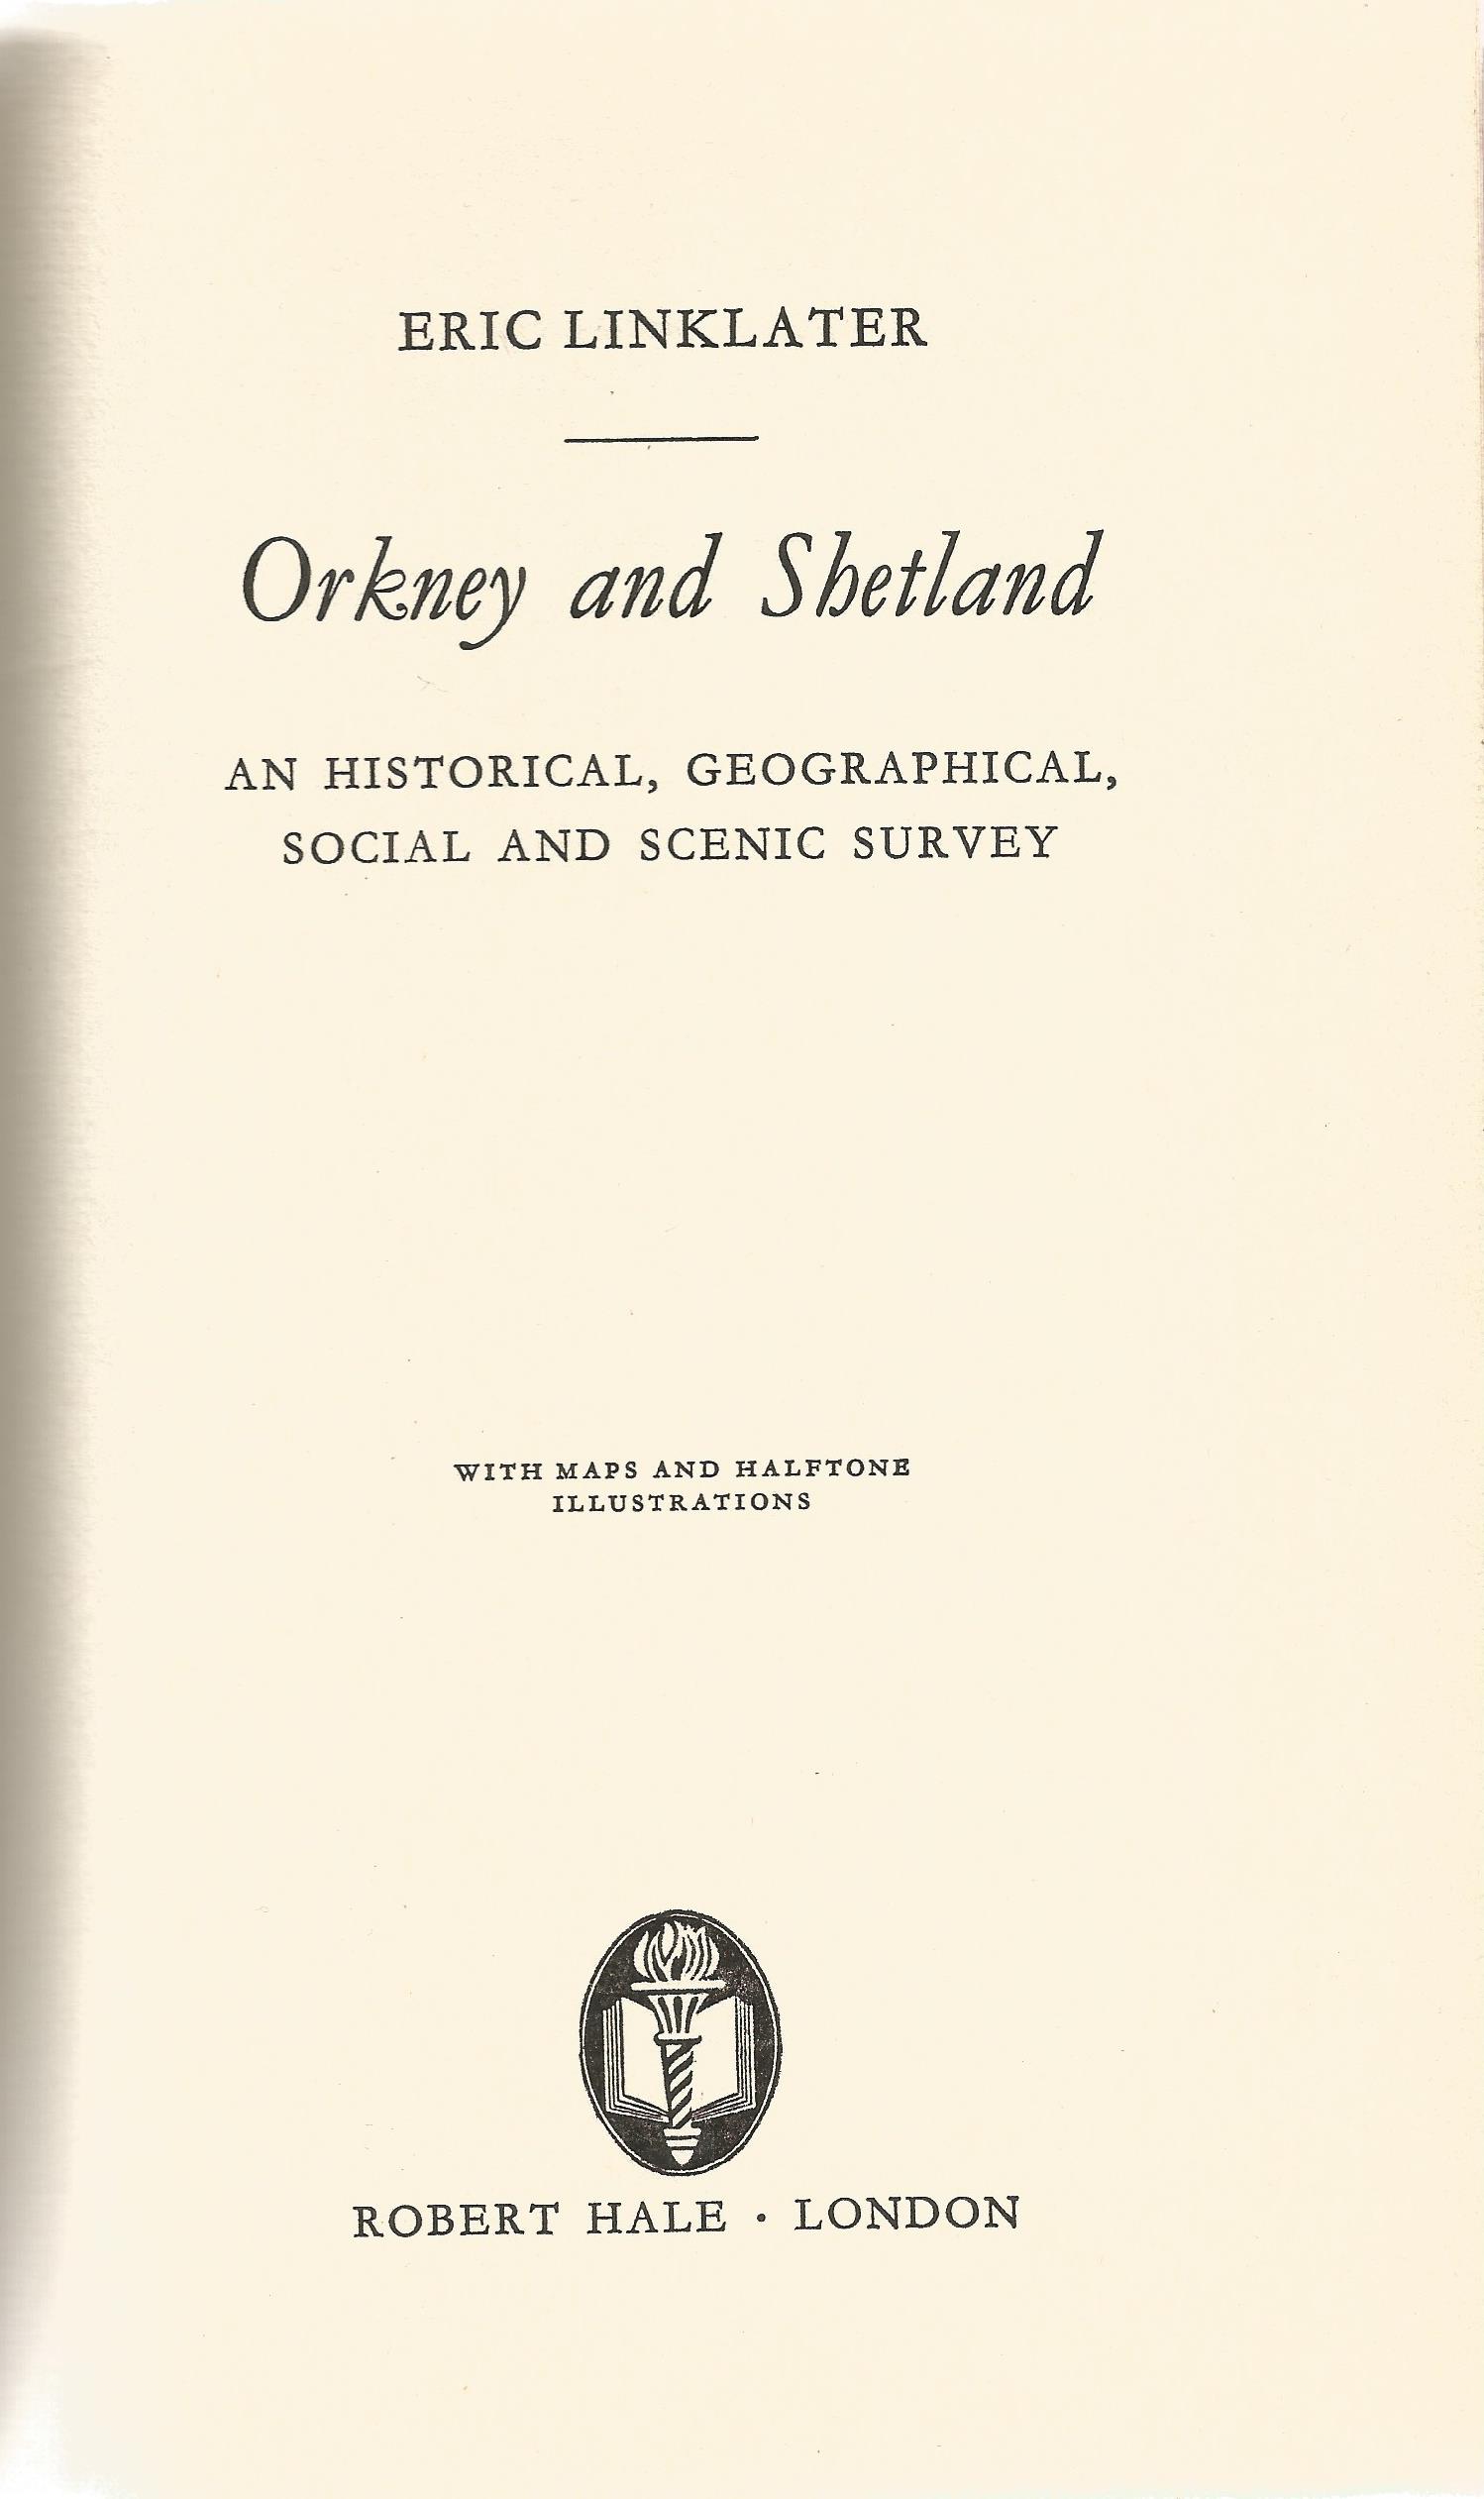 Orkney and Shetland by Eric Linklater Hardback Book First UK Edition 1965 published by Robert Hale - Image 2 of 3